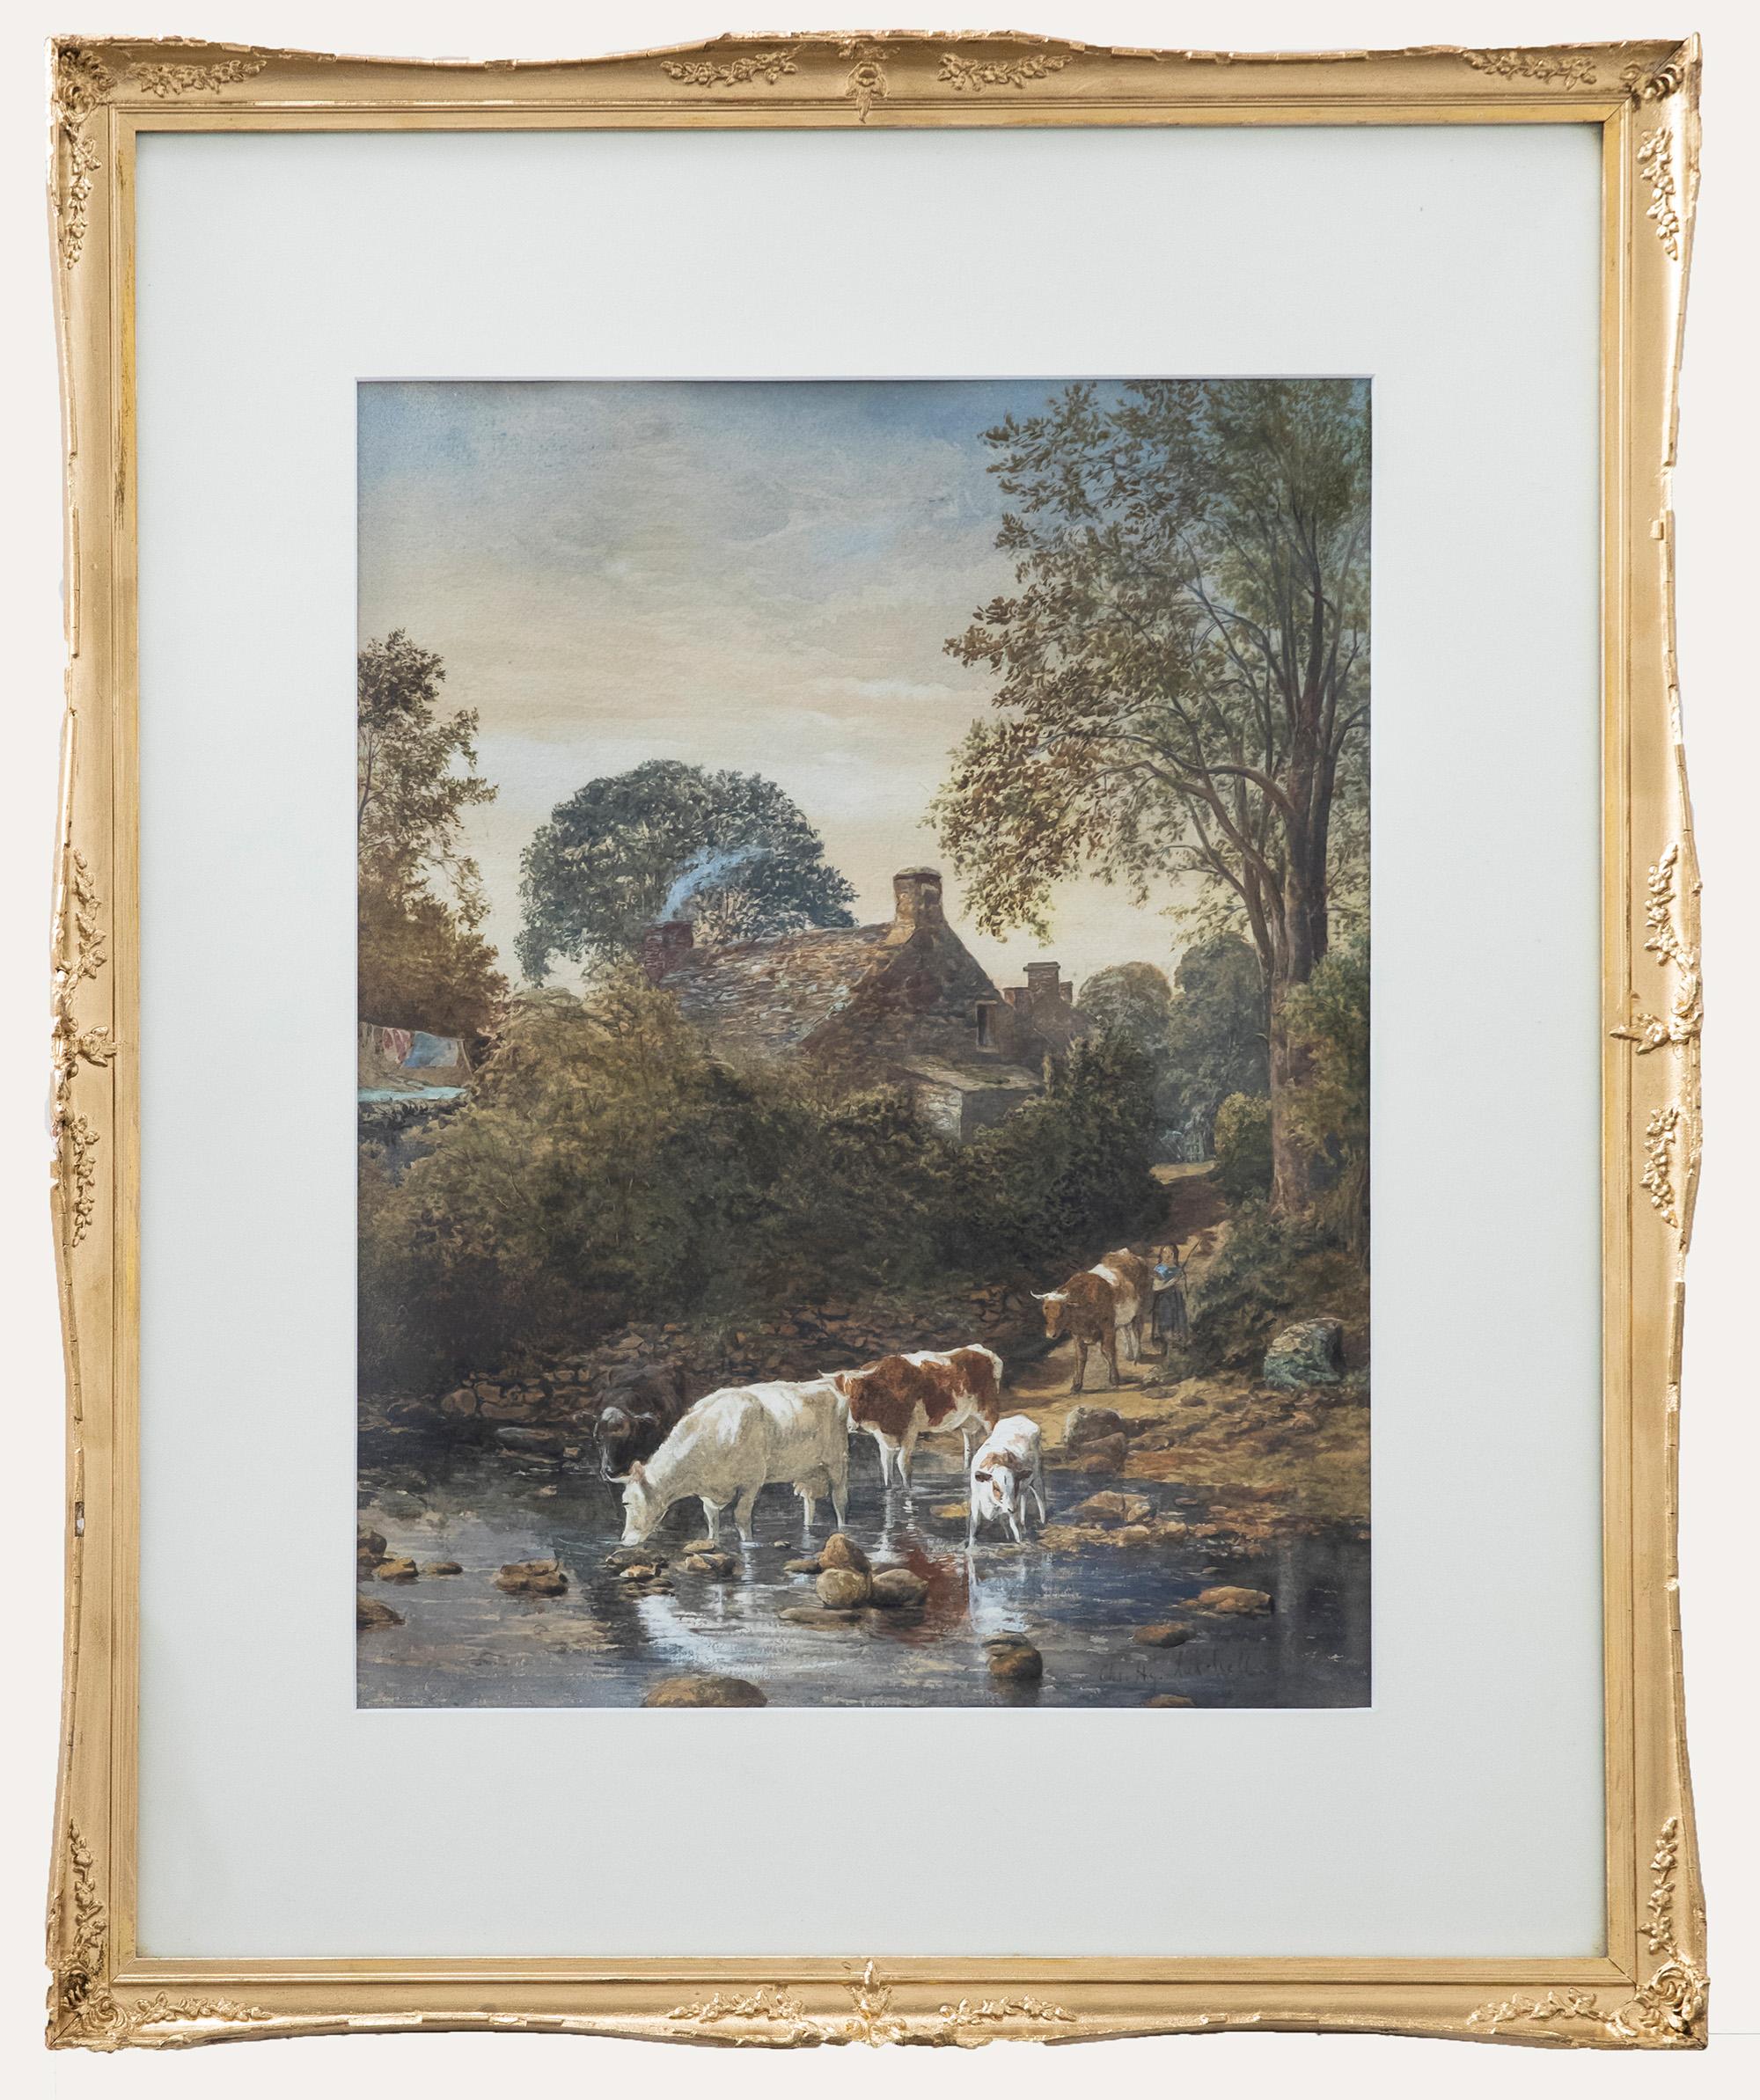 Unknown Landscape Art - Charles Lutchell - Framed 19th Century Watercolour, Cattle Watering